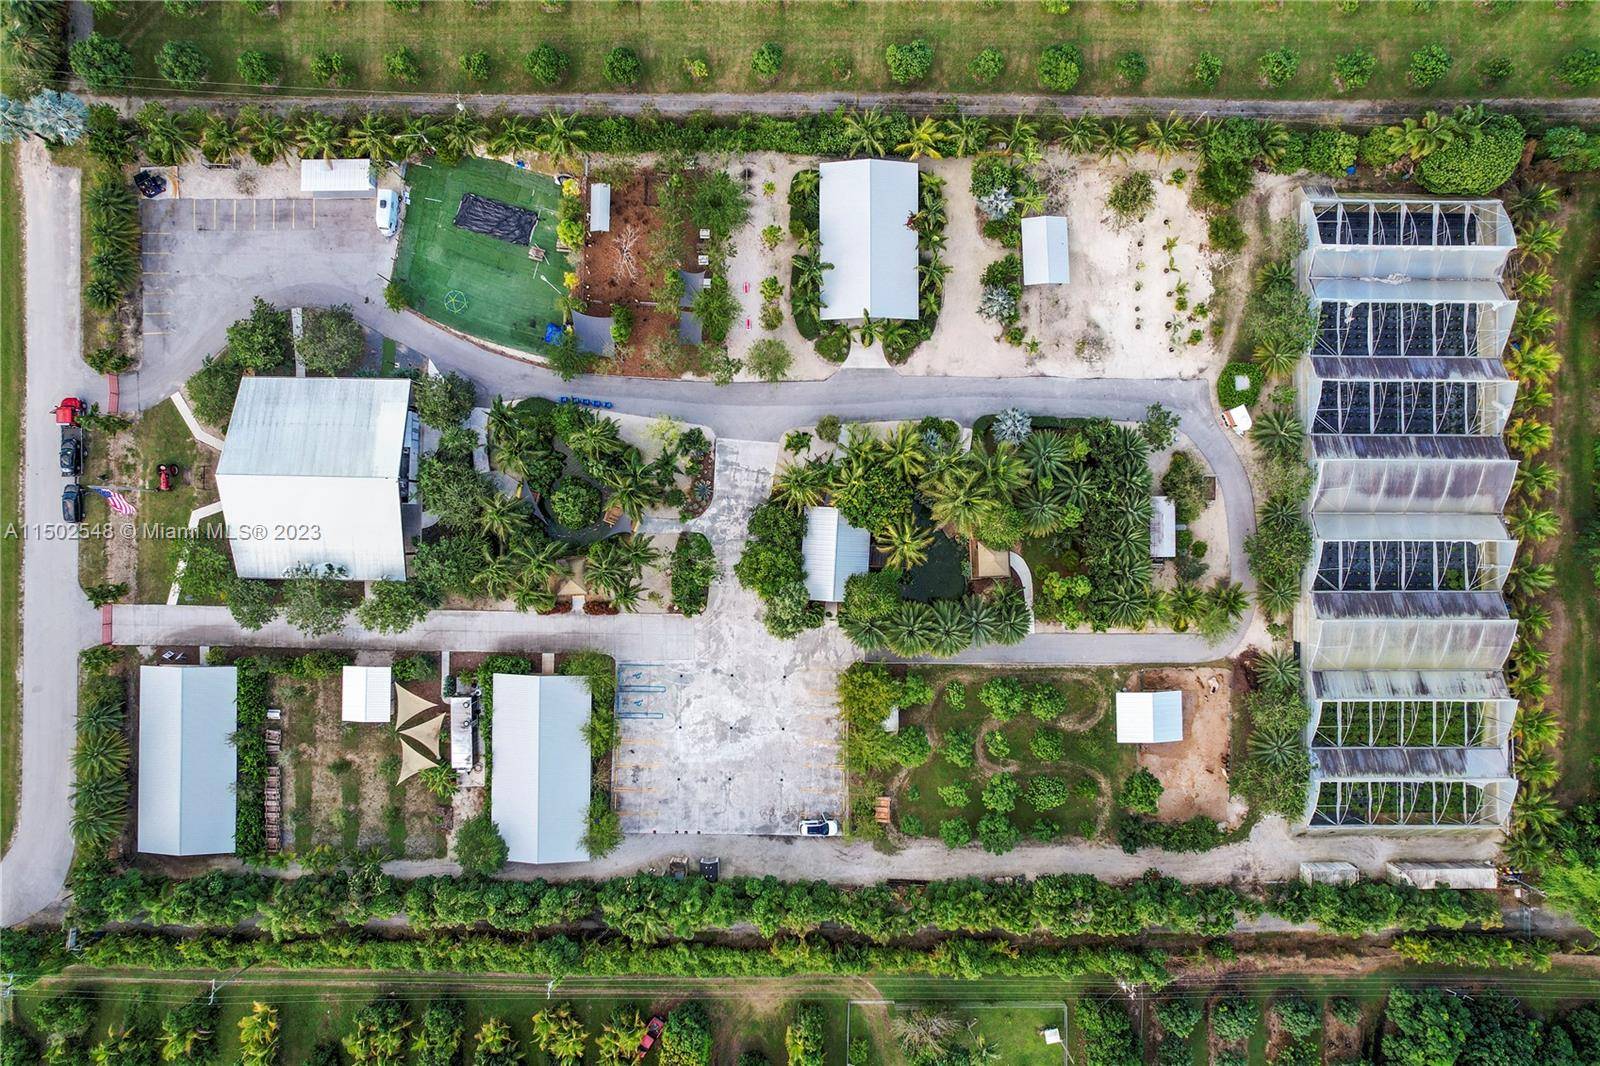 FARMHOUSE MIAMI A 5 ACRE TURNKEY AGRITOURISM VENUE LOCATED BETWEEN 2 NATIONAL PARKS, BISCAYNE NP AND THE EVERGALDES, MINUTES FROM THE FL.